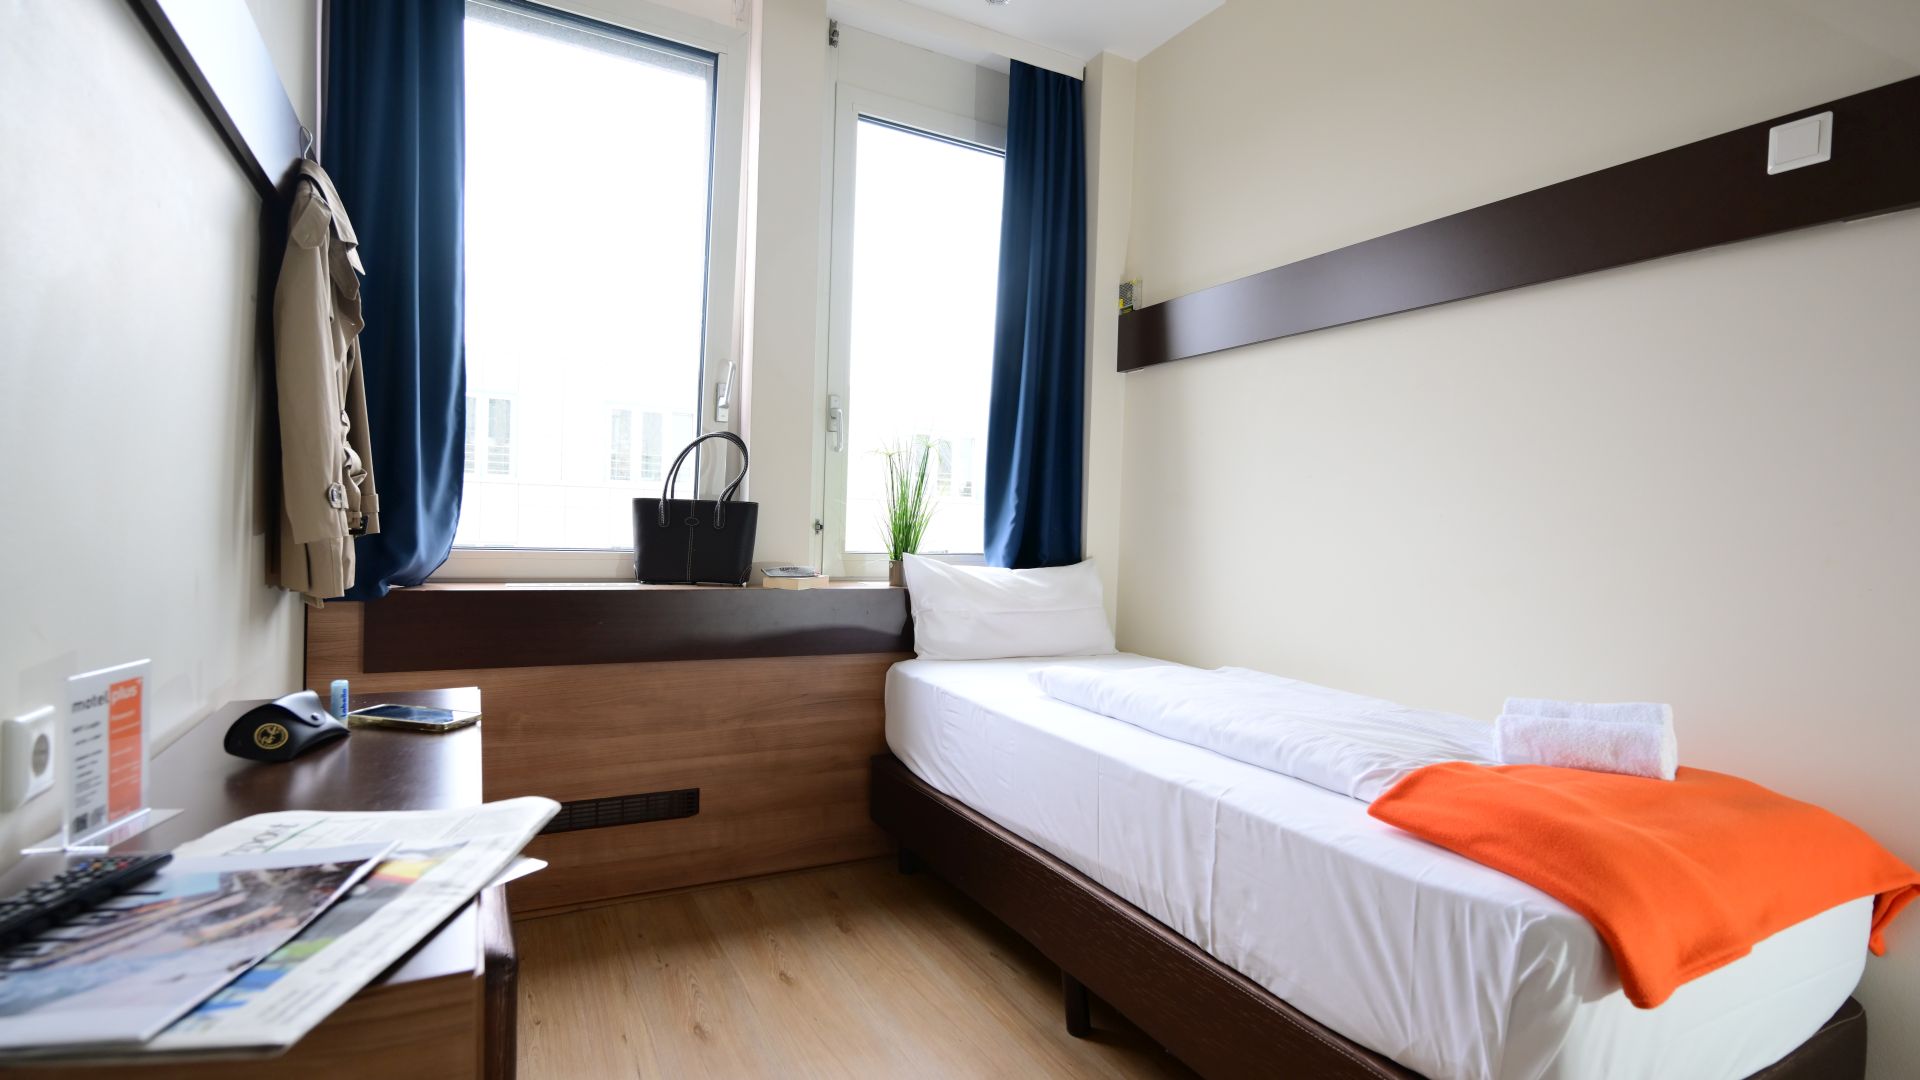 Inexpensive Hotel in Berlin: Motel Plus – Central Location & Modern Style